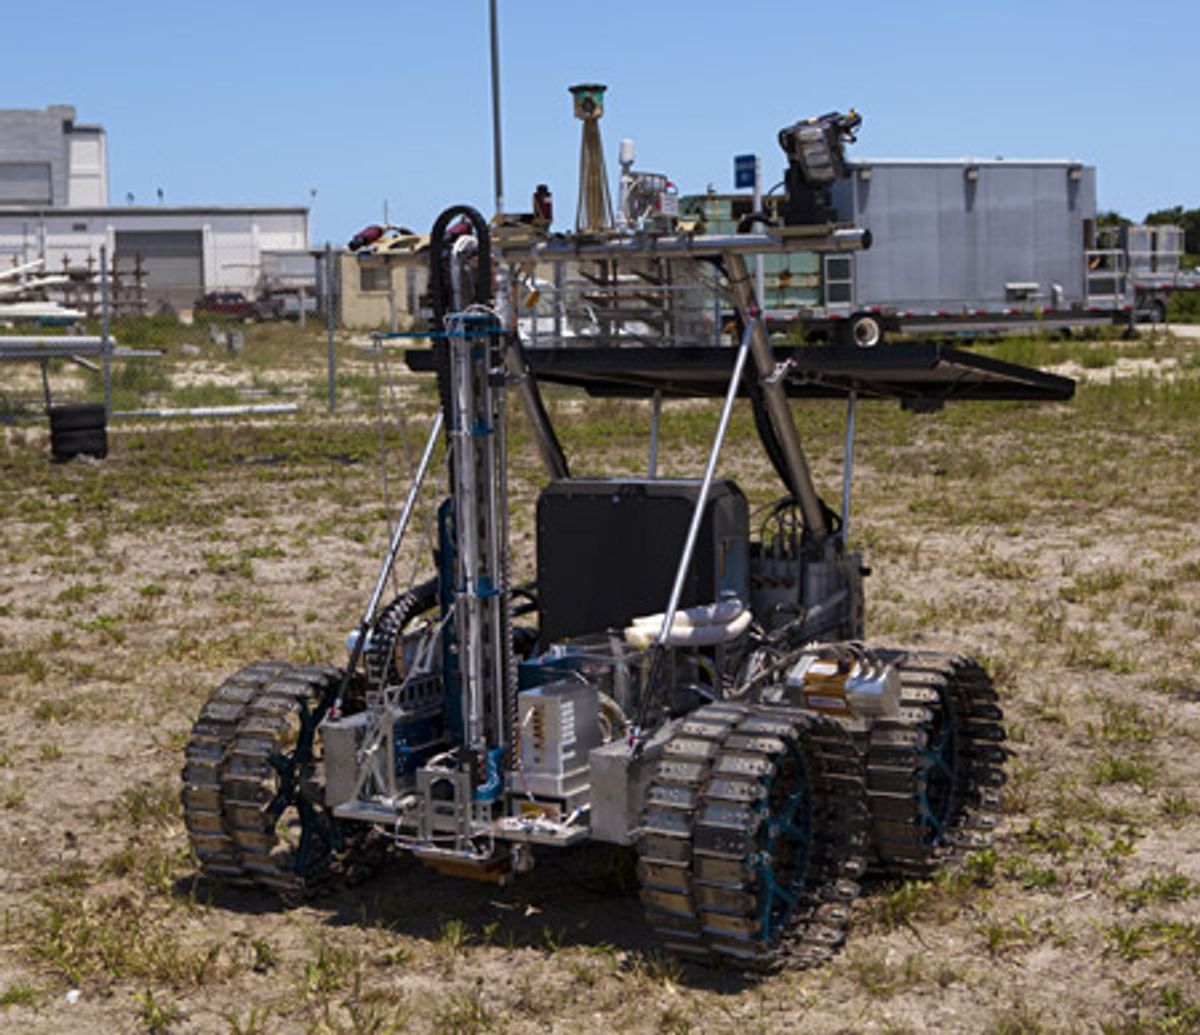 NASA Testing Rover to Prospect for Water on the Moon